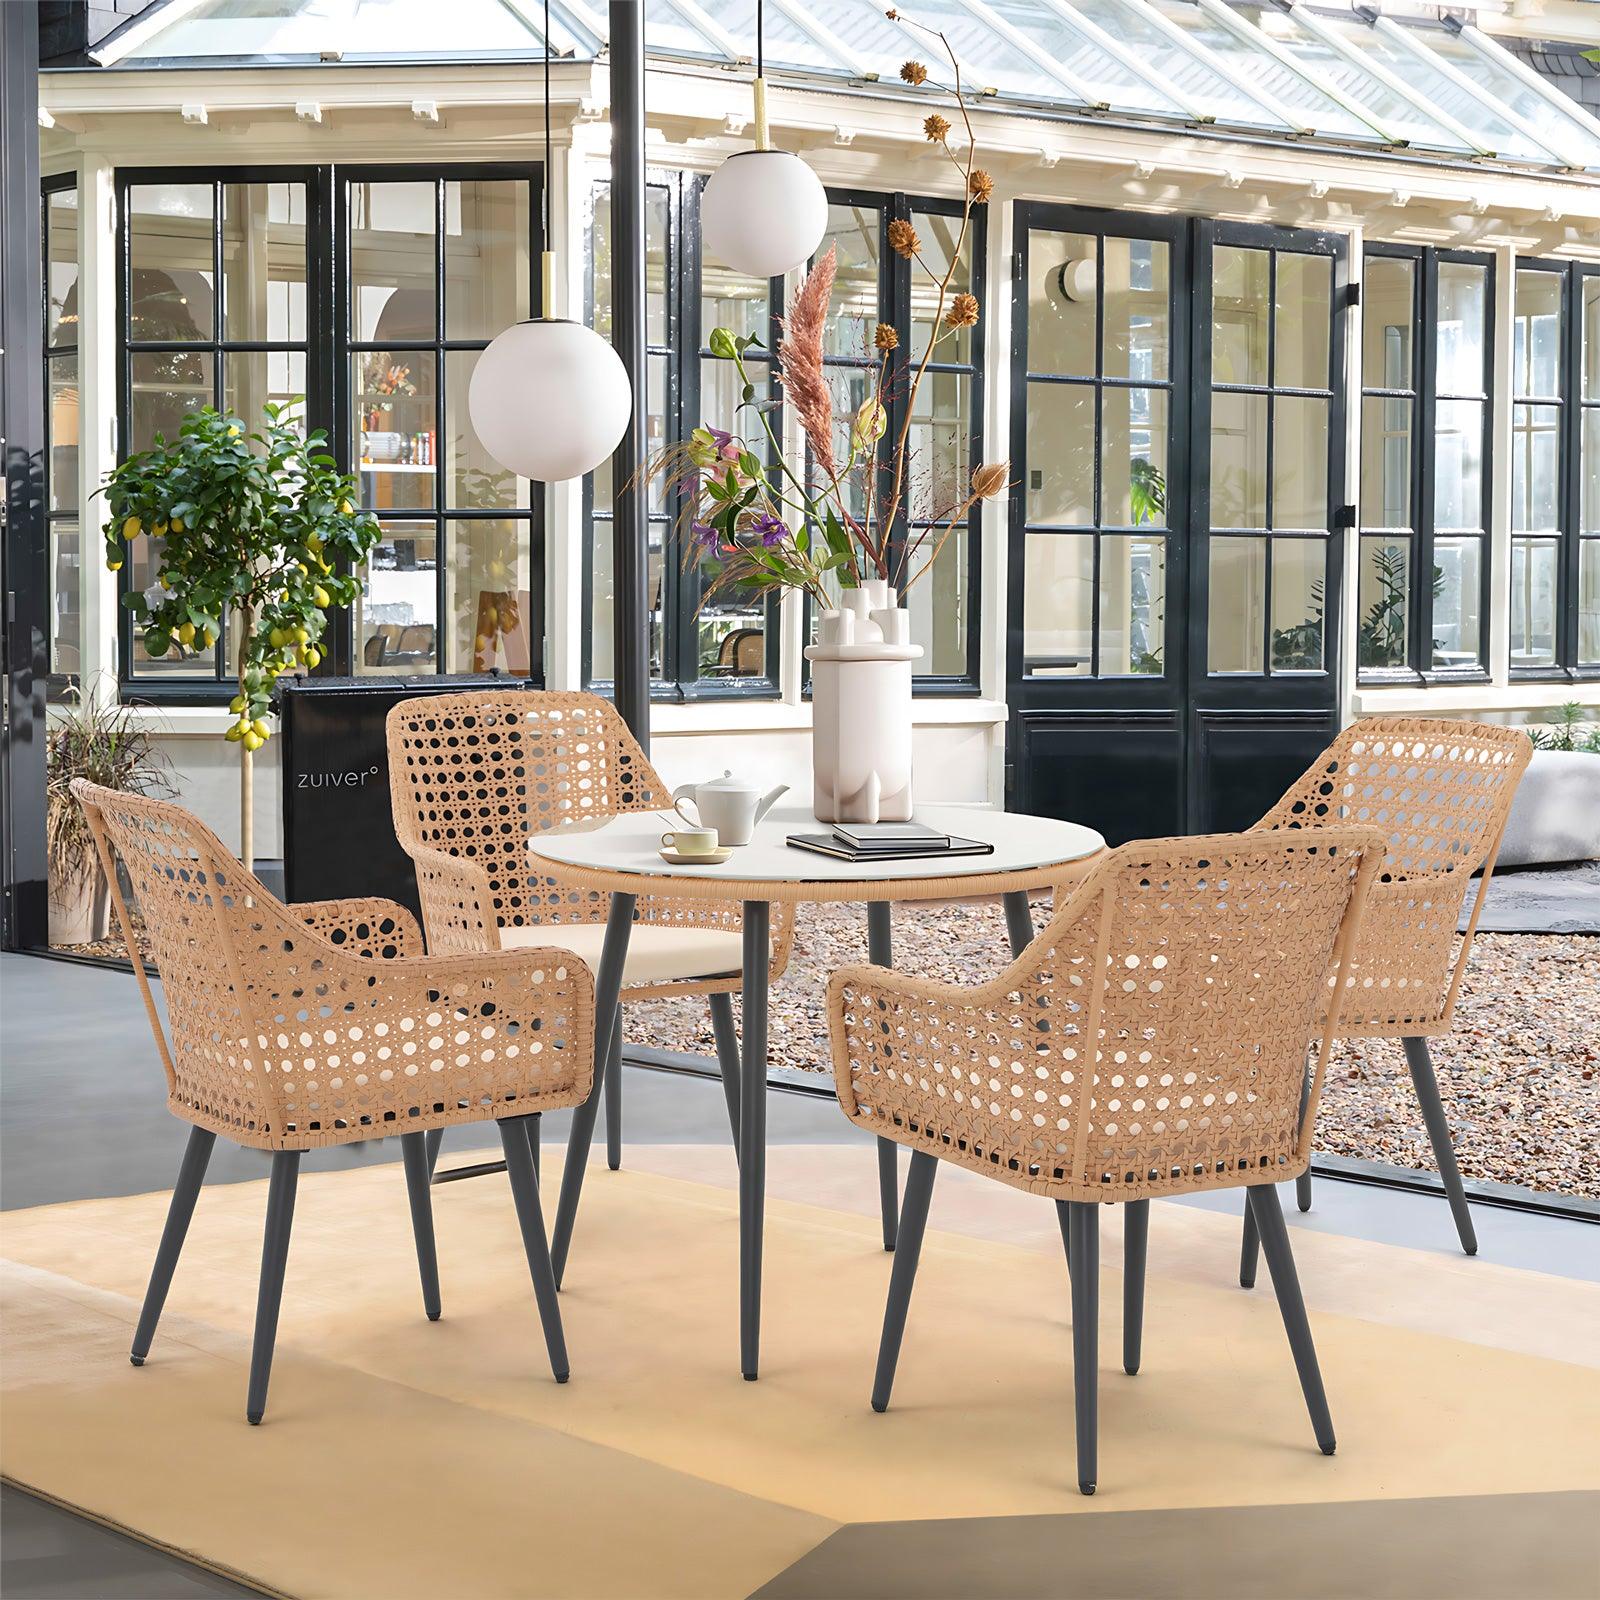 modern natural round outdoor dining sets for 4 people, 1 table with umbrella hole and 4 wicker chairs